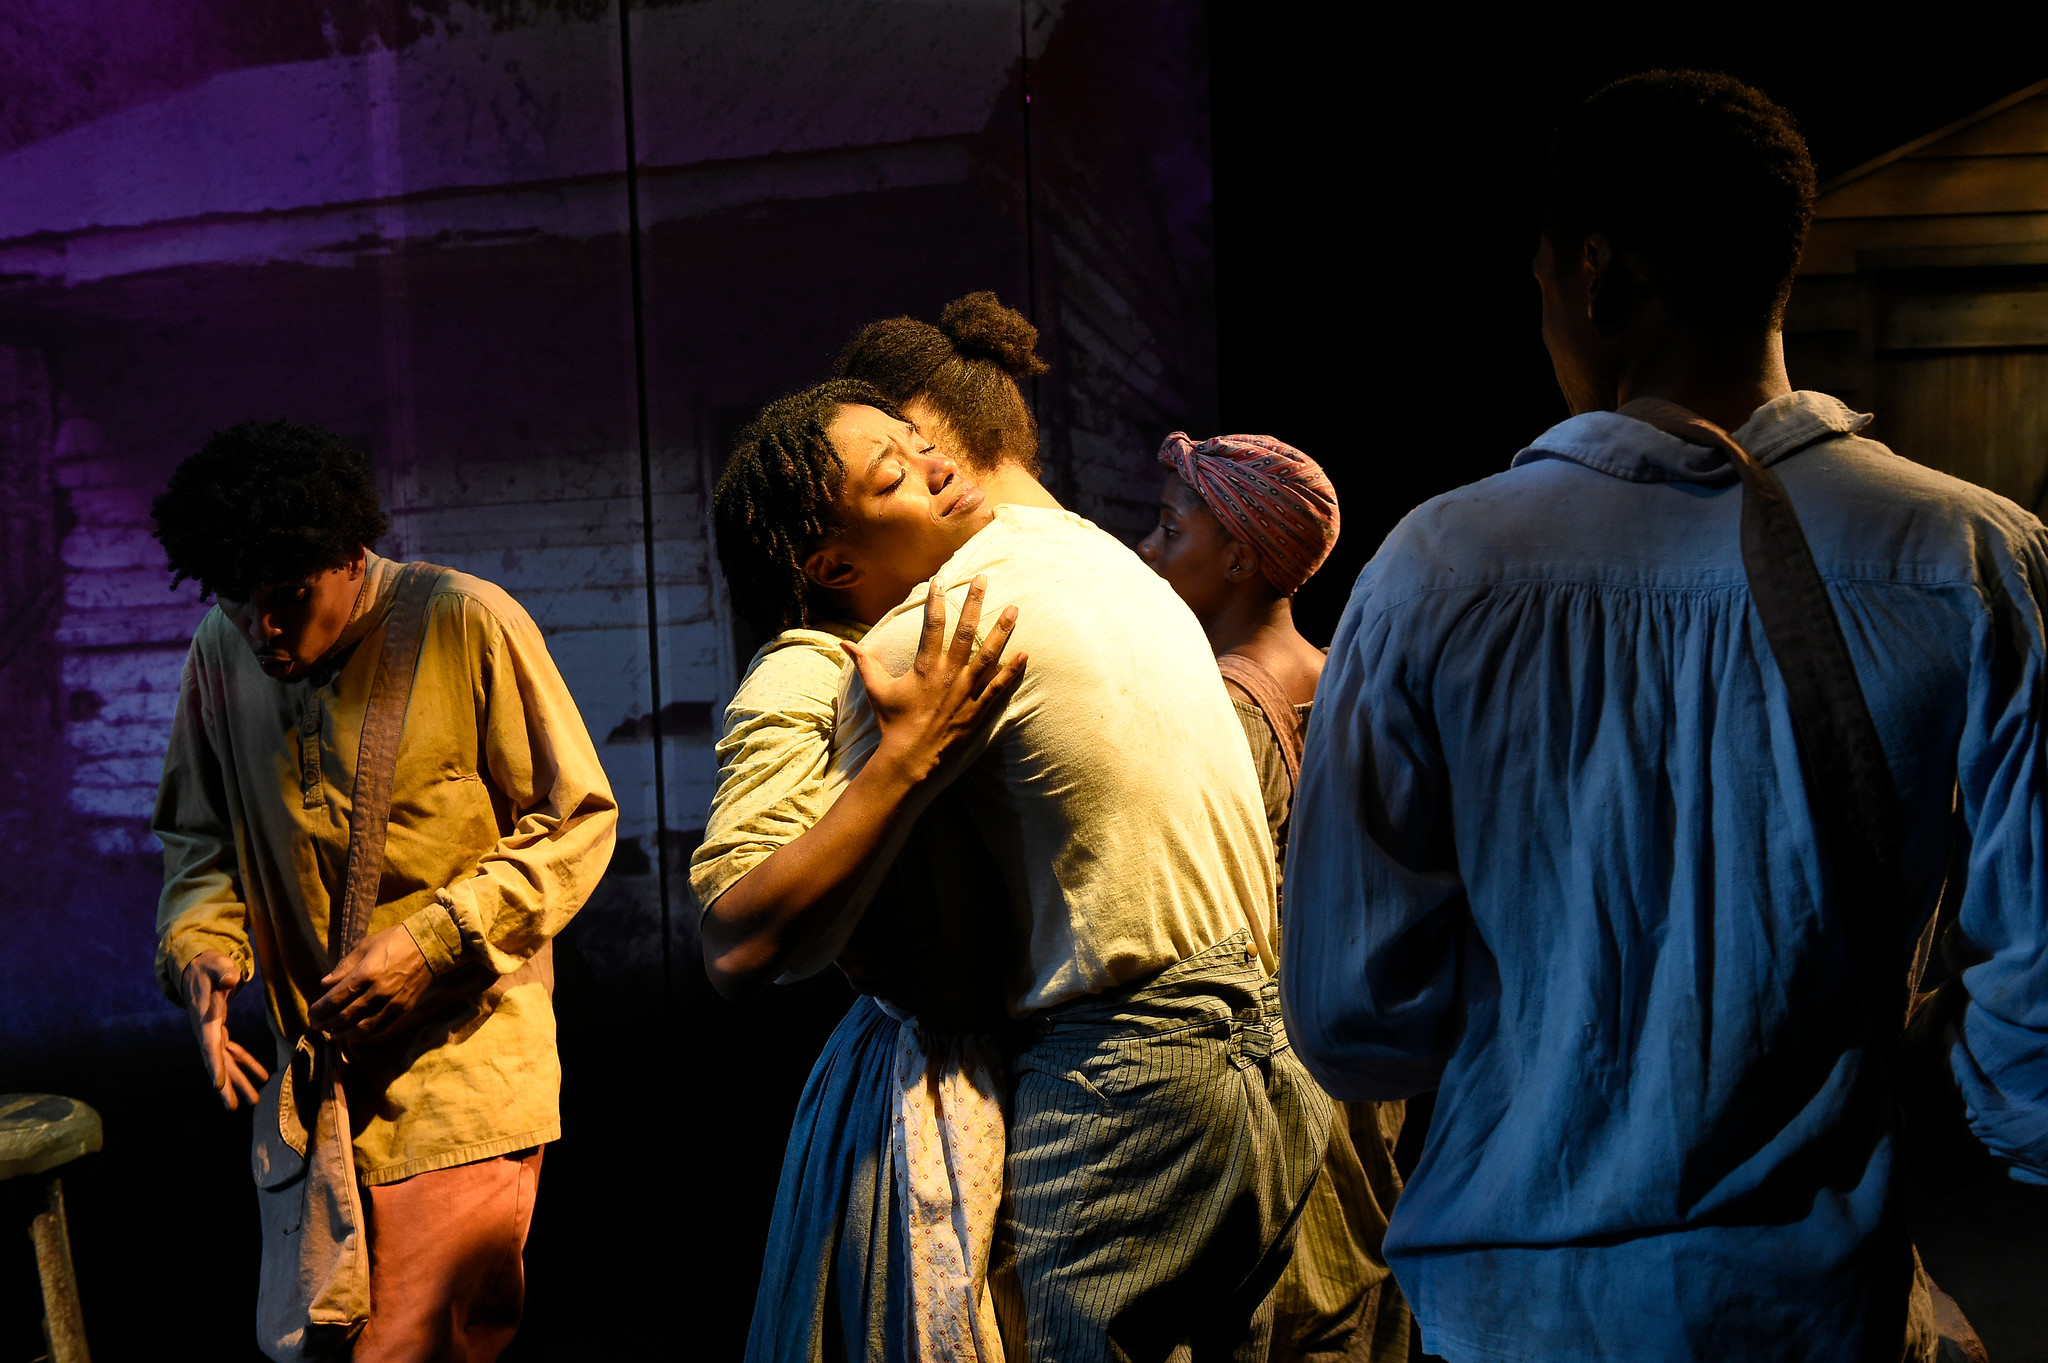 USC School of Dramatic Arts production of Suzan-Lori Parks' Father Comes Home From the Wars (Parts 1, 2 & 3), performed in Spring 2020. 